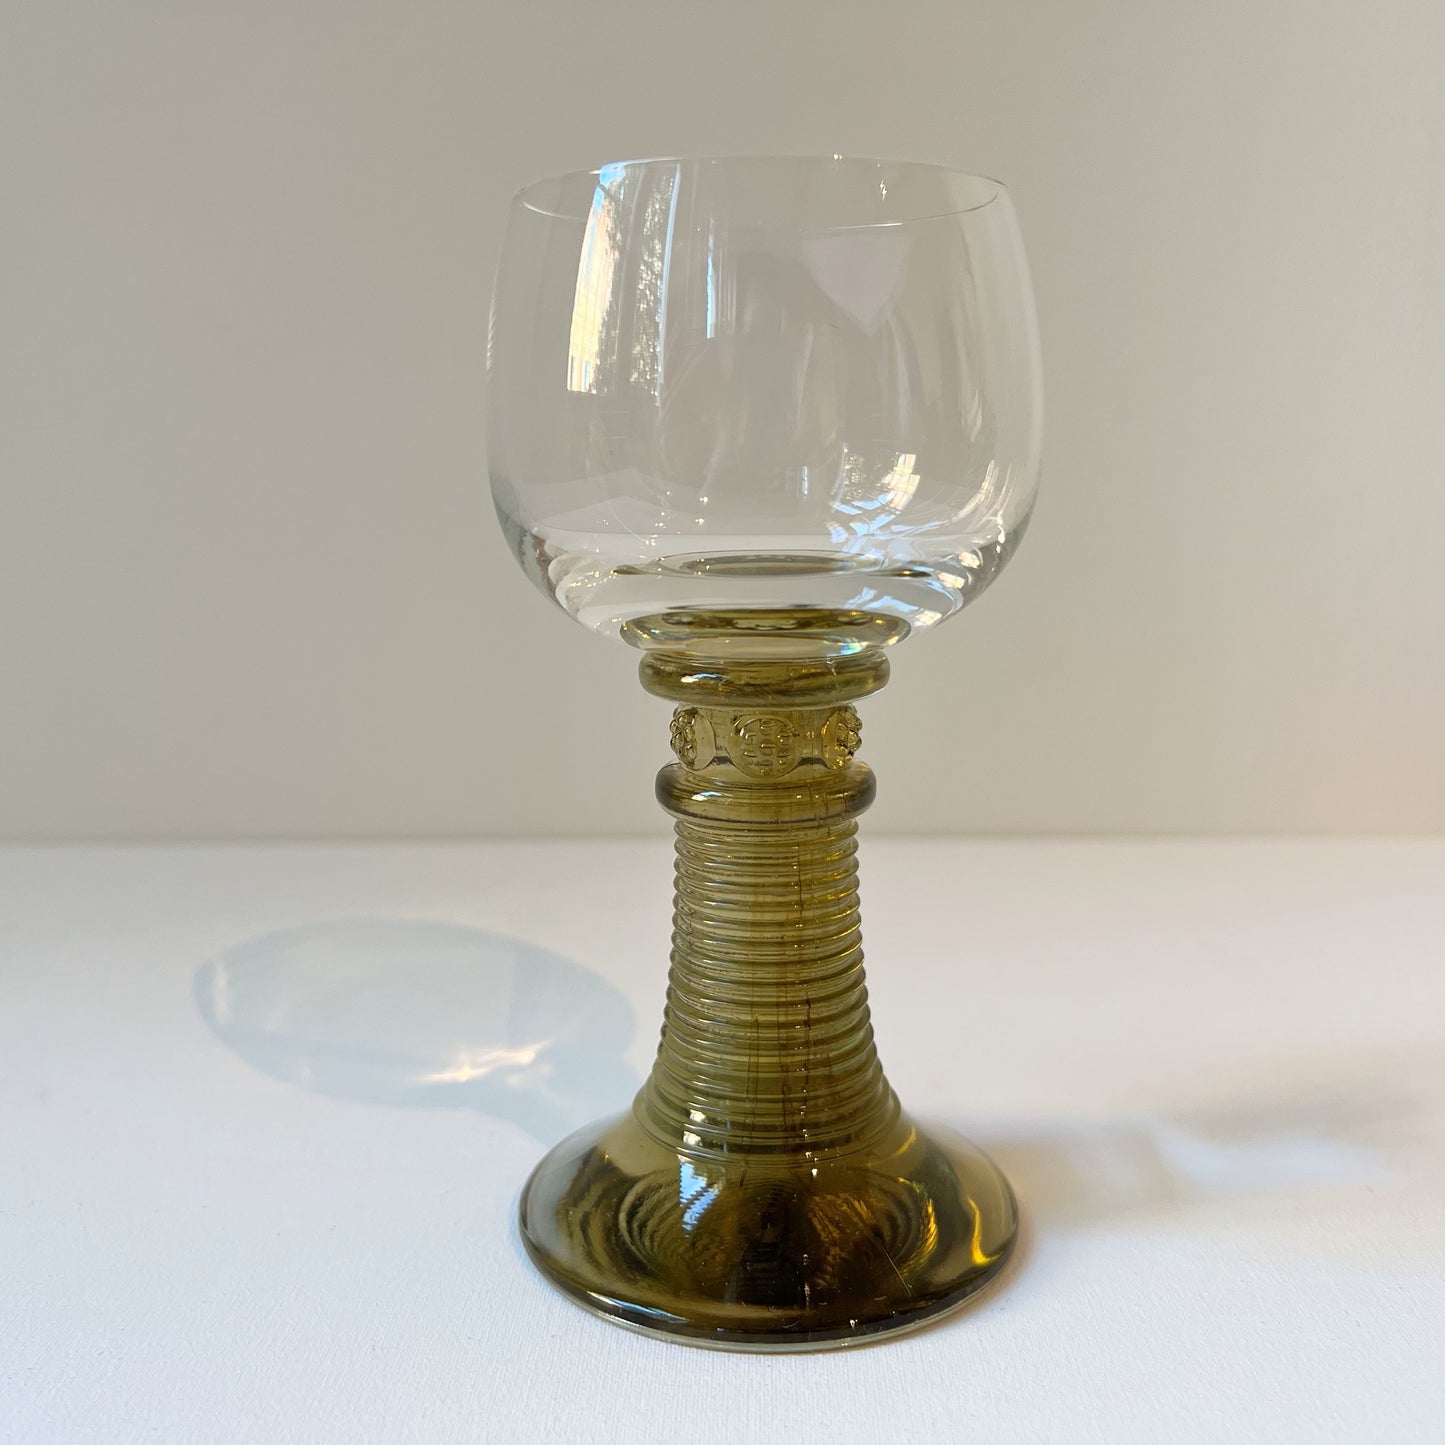 【Vintage】Germany - 1960s Roemer Wine Glass